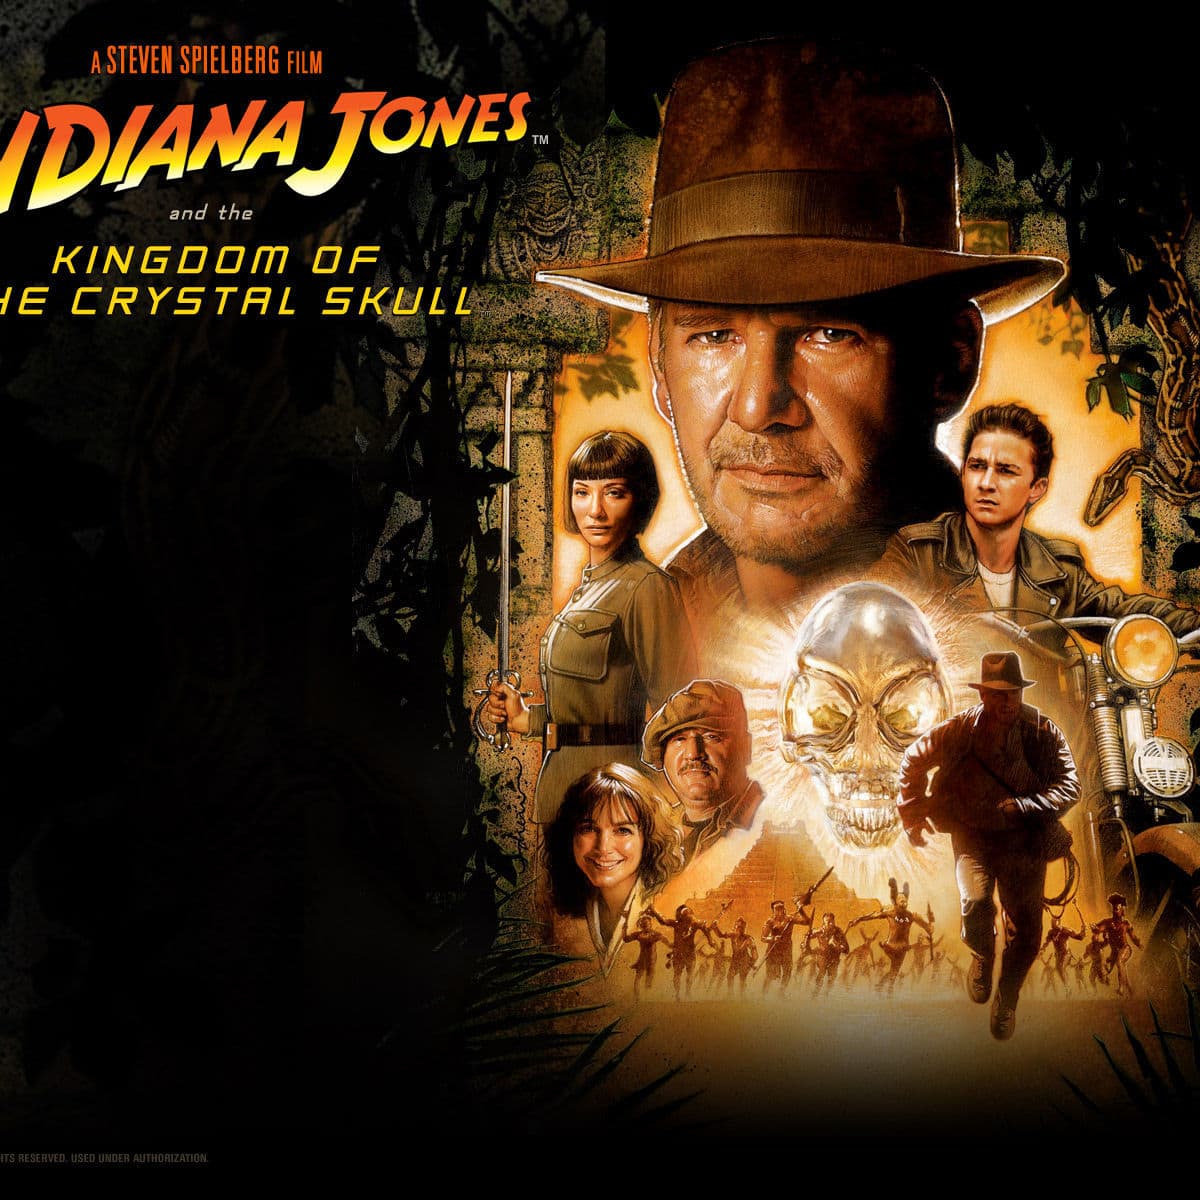 Indiana Jones and the Kingdom of the Crystal Skull movie review (2008)